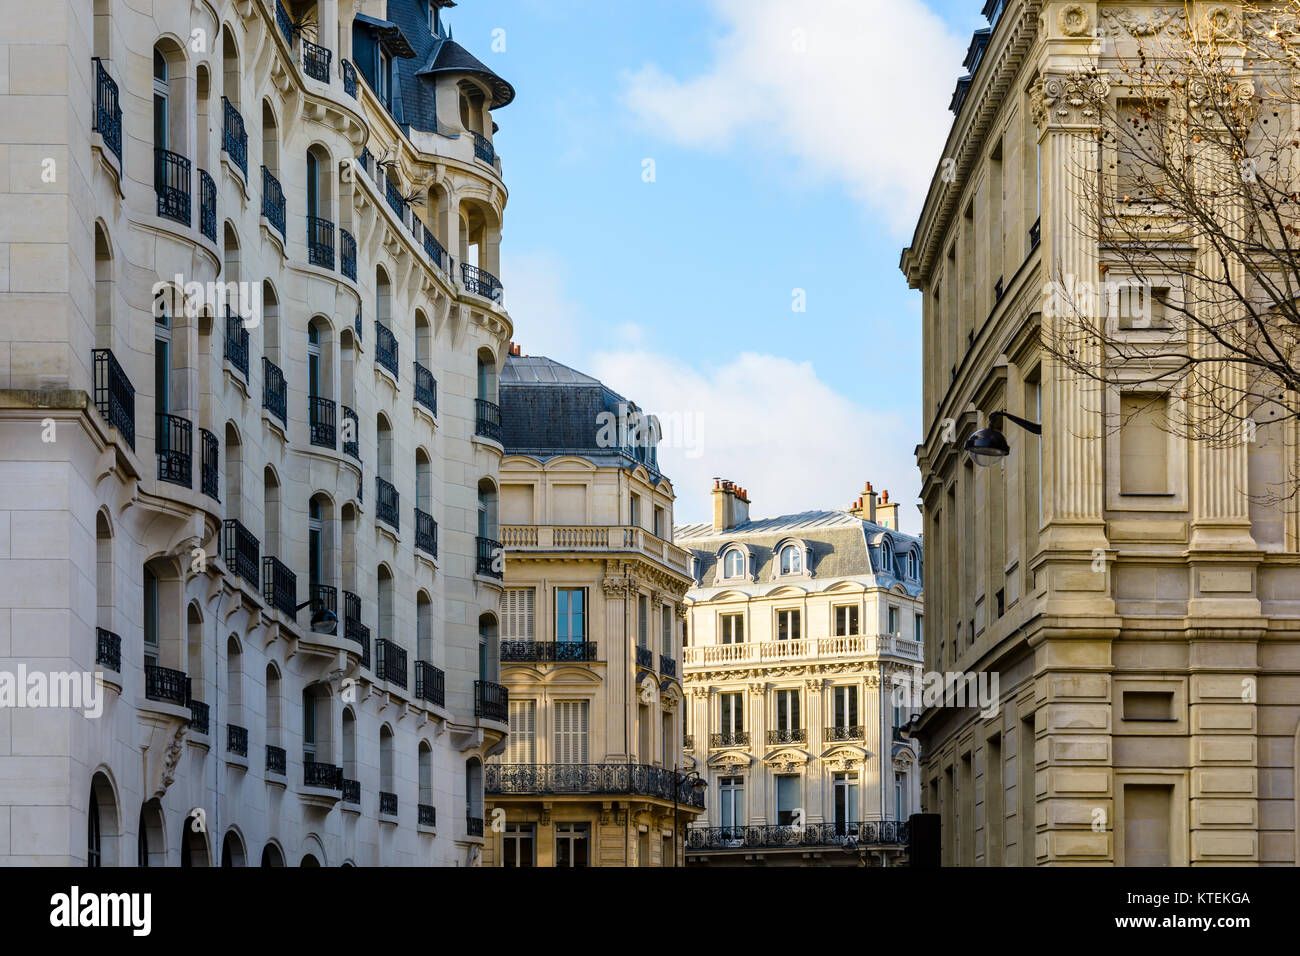 Typical residential buildings of Haussmannian and Art Deco style in chic neighborhoods of Paris, France, at sunset. Stock Photo